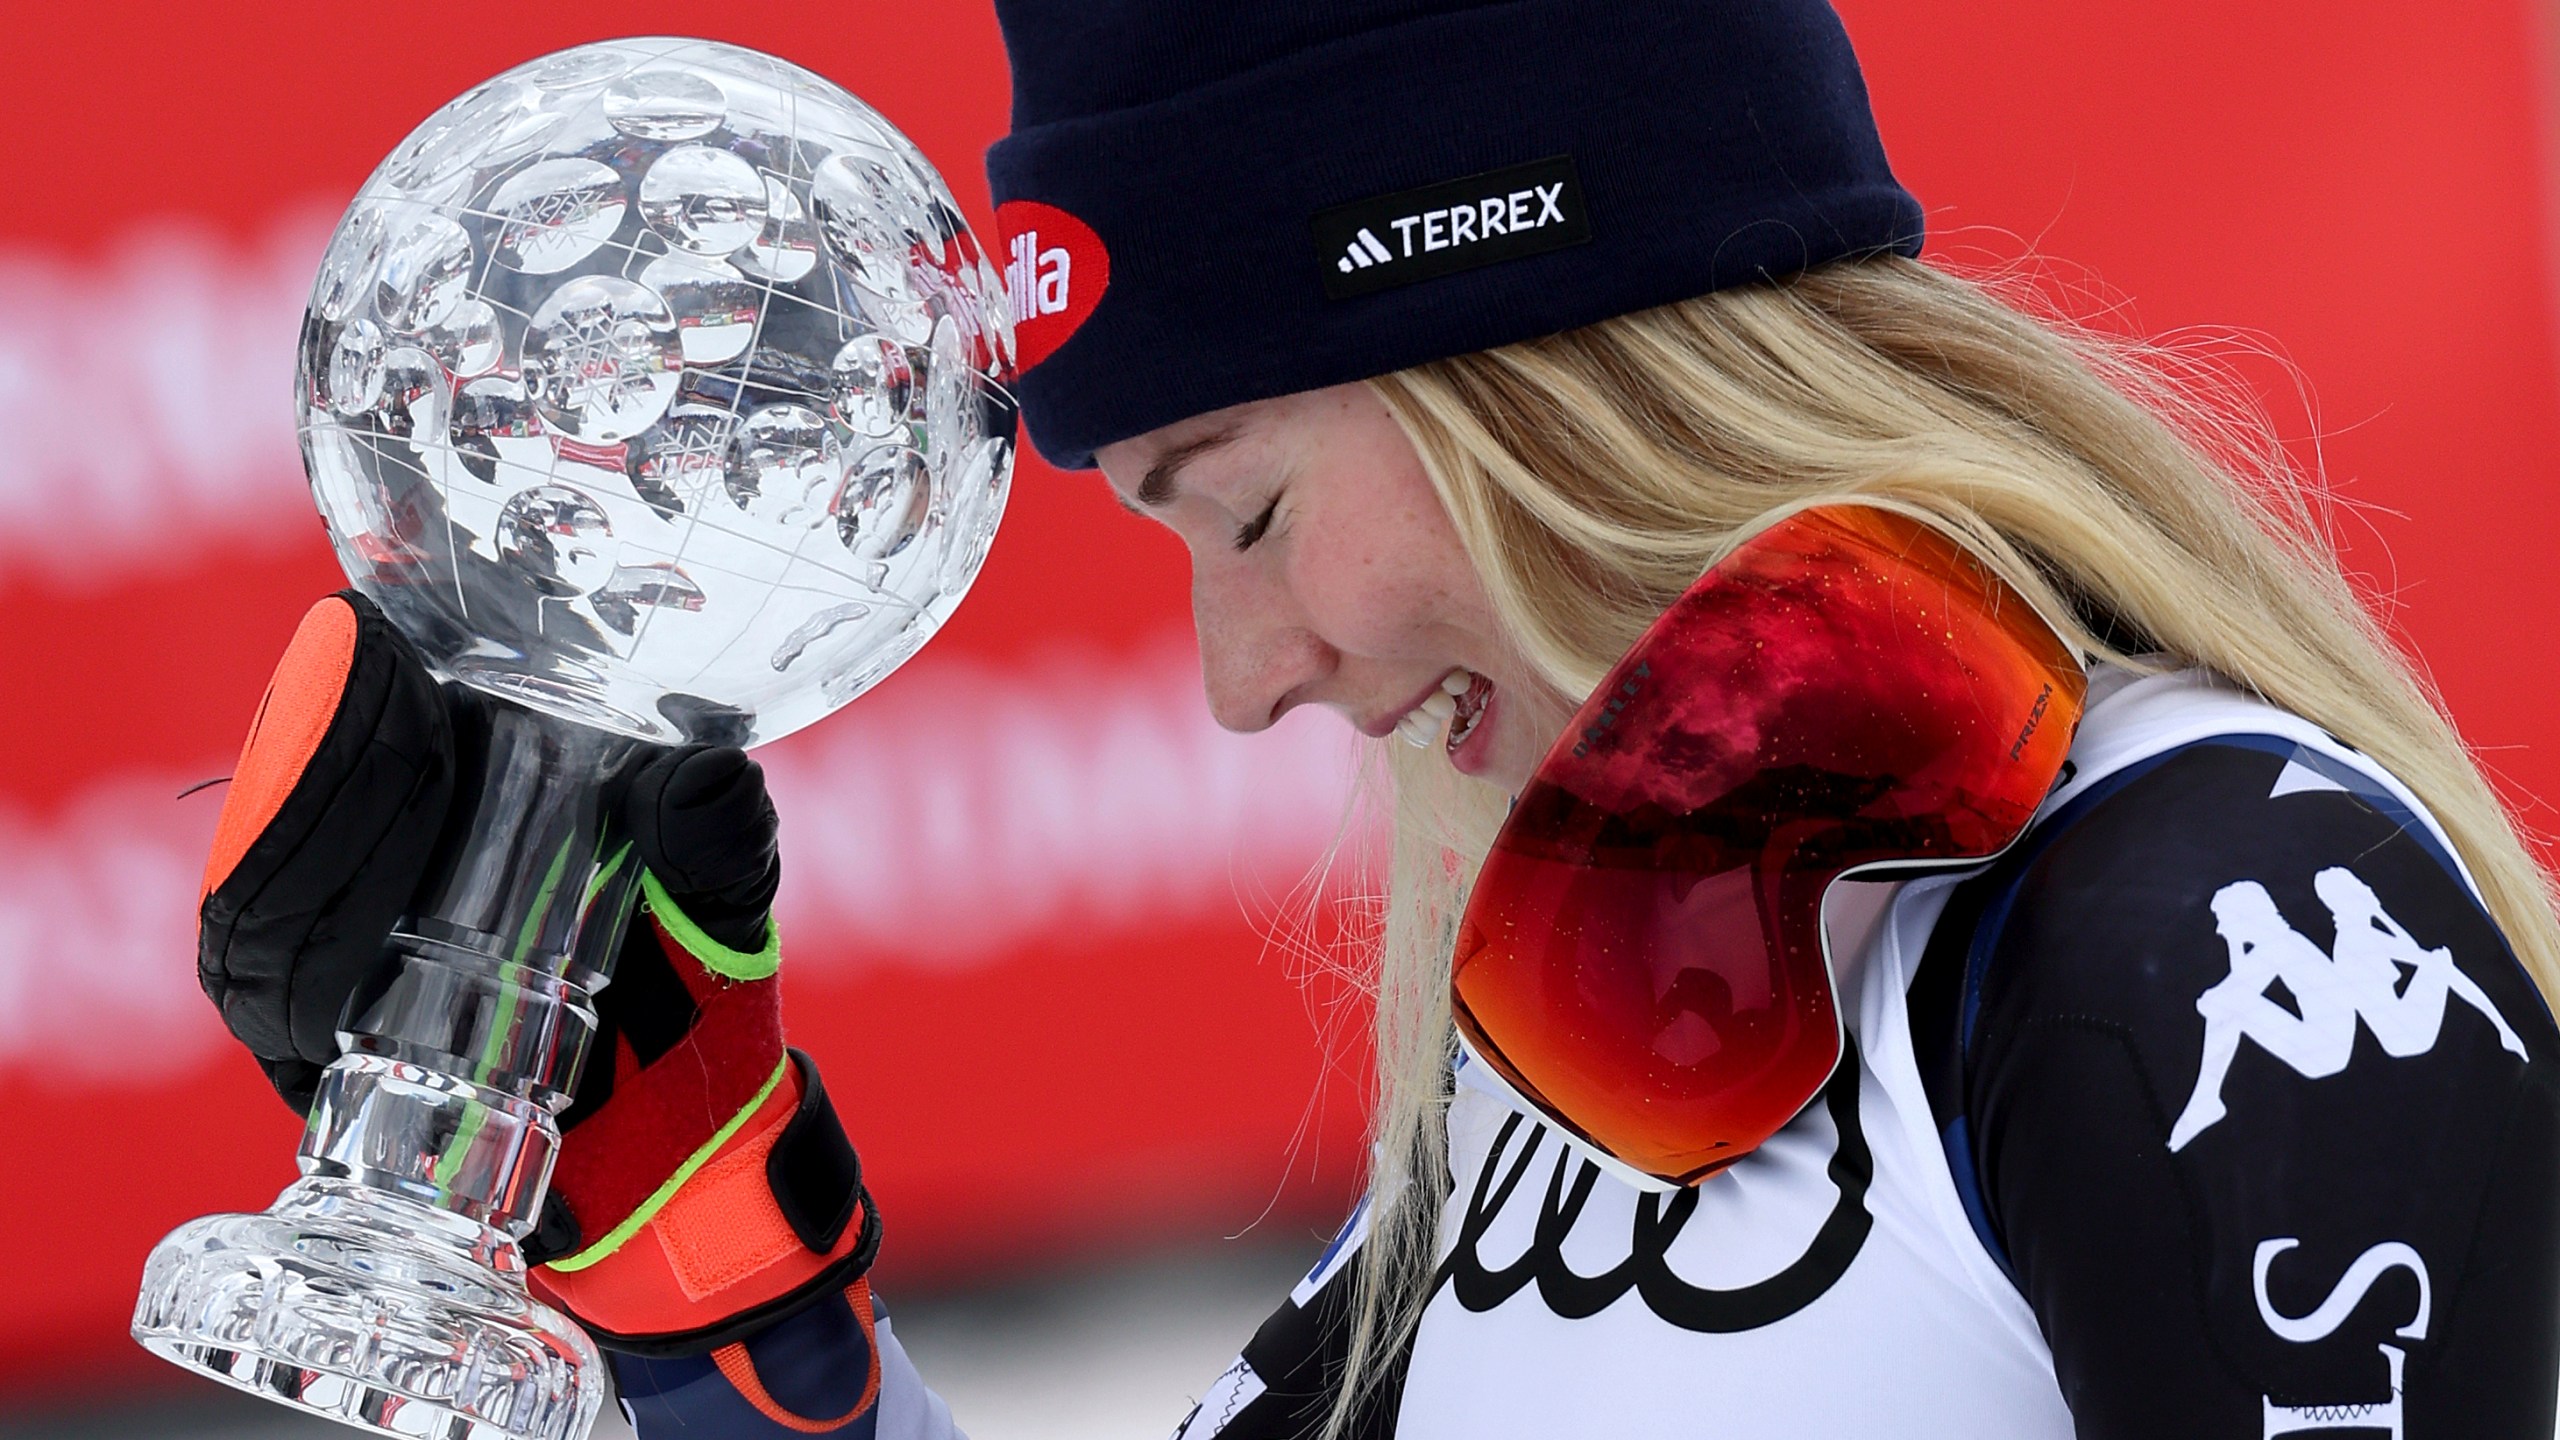 United States' Mikaela Shiffrin holds up the trophy for the alpine ski, women's World Cup slalom discipline, in Saalbach, Austria, Saturday, March 16, 2024. (AP Photo/Marco Trovati)